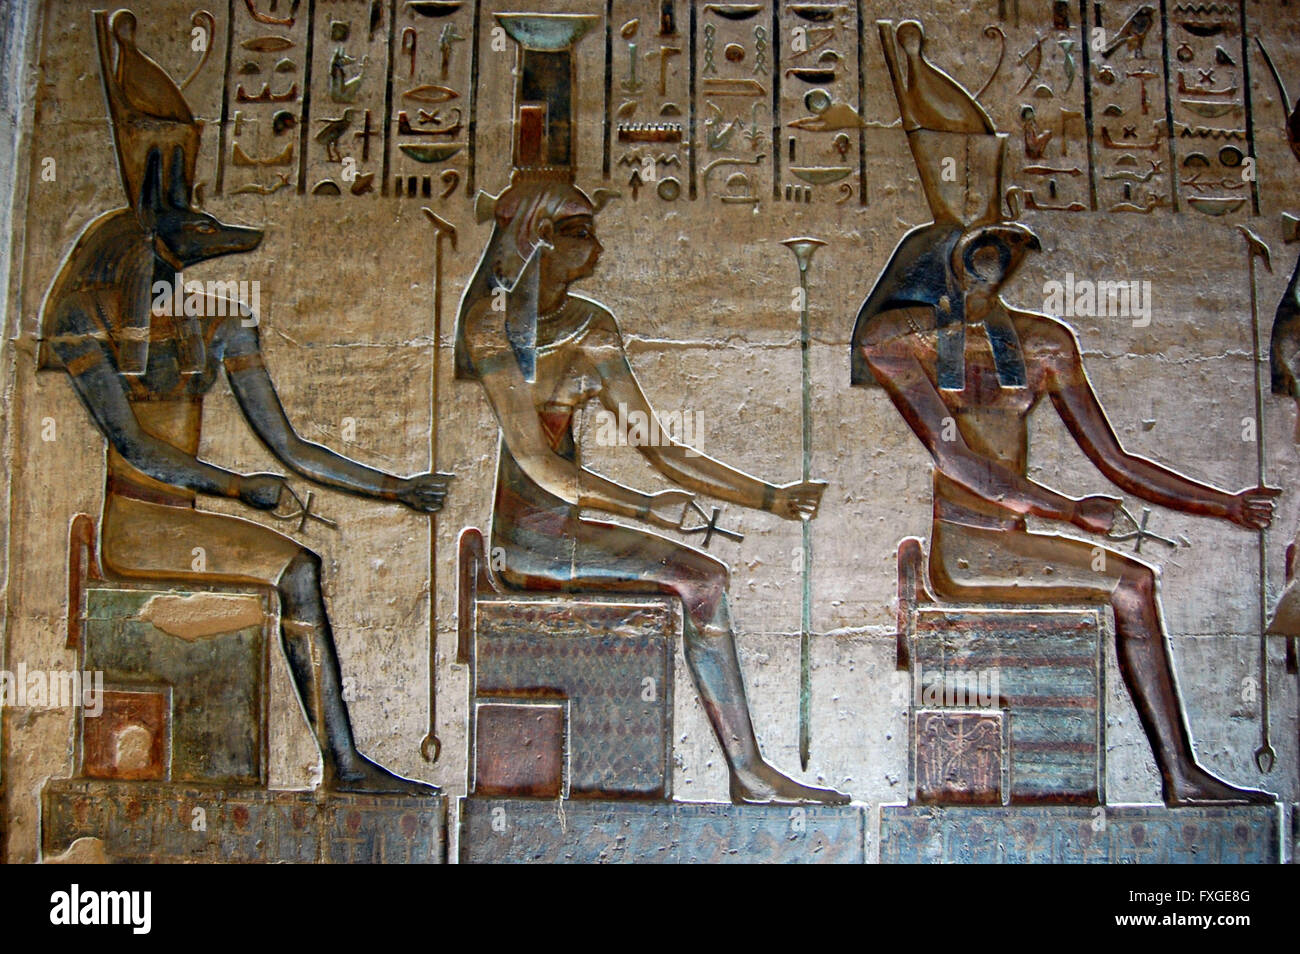 A wall carving hieroglyphic with coloured paint, in Valley of the Kings, Luxor, Egypt Stock Photo